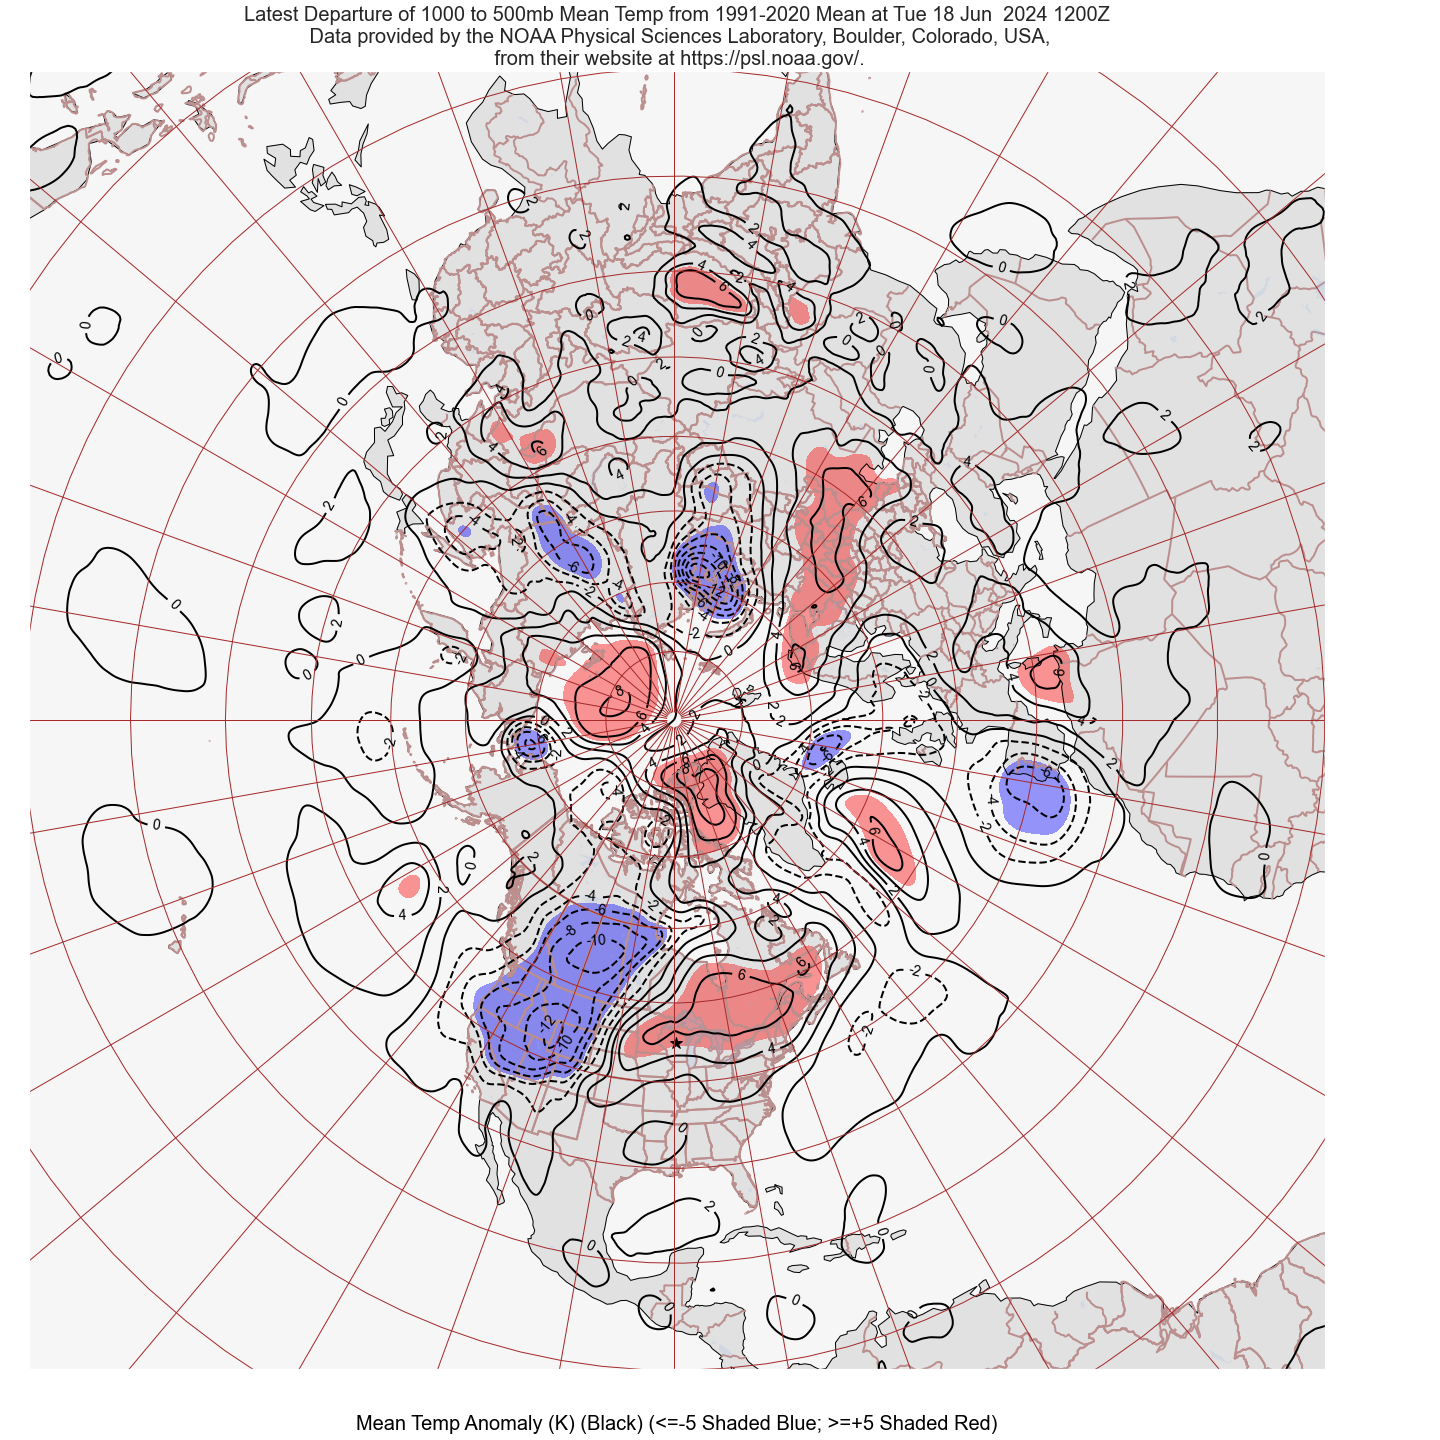 1000-500mb Mean Temperature Anomaly